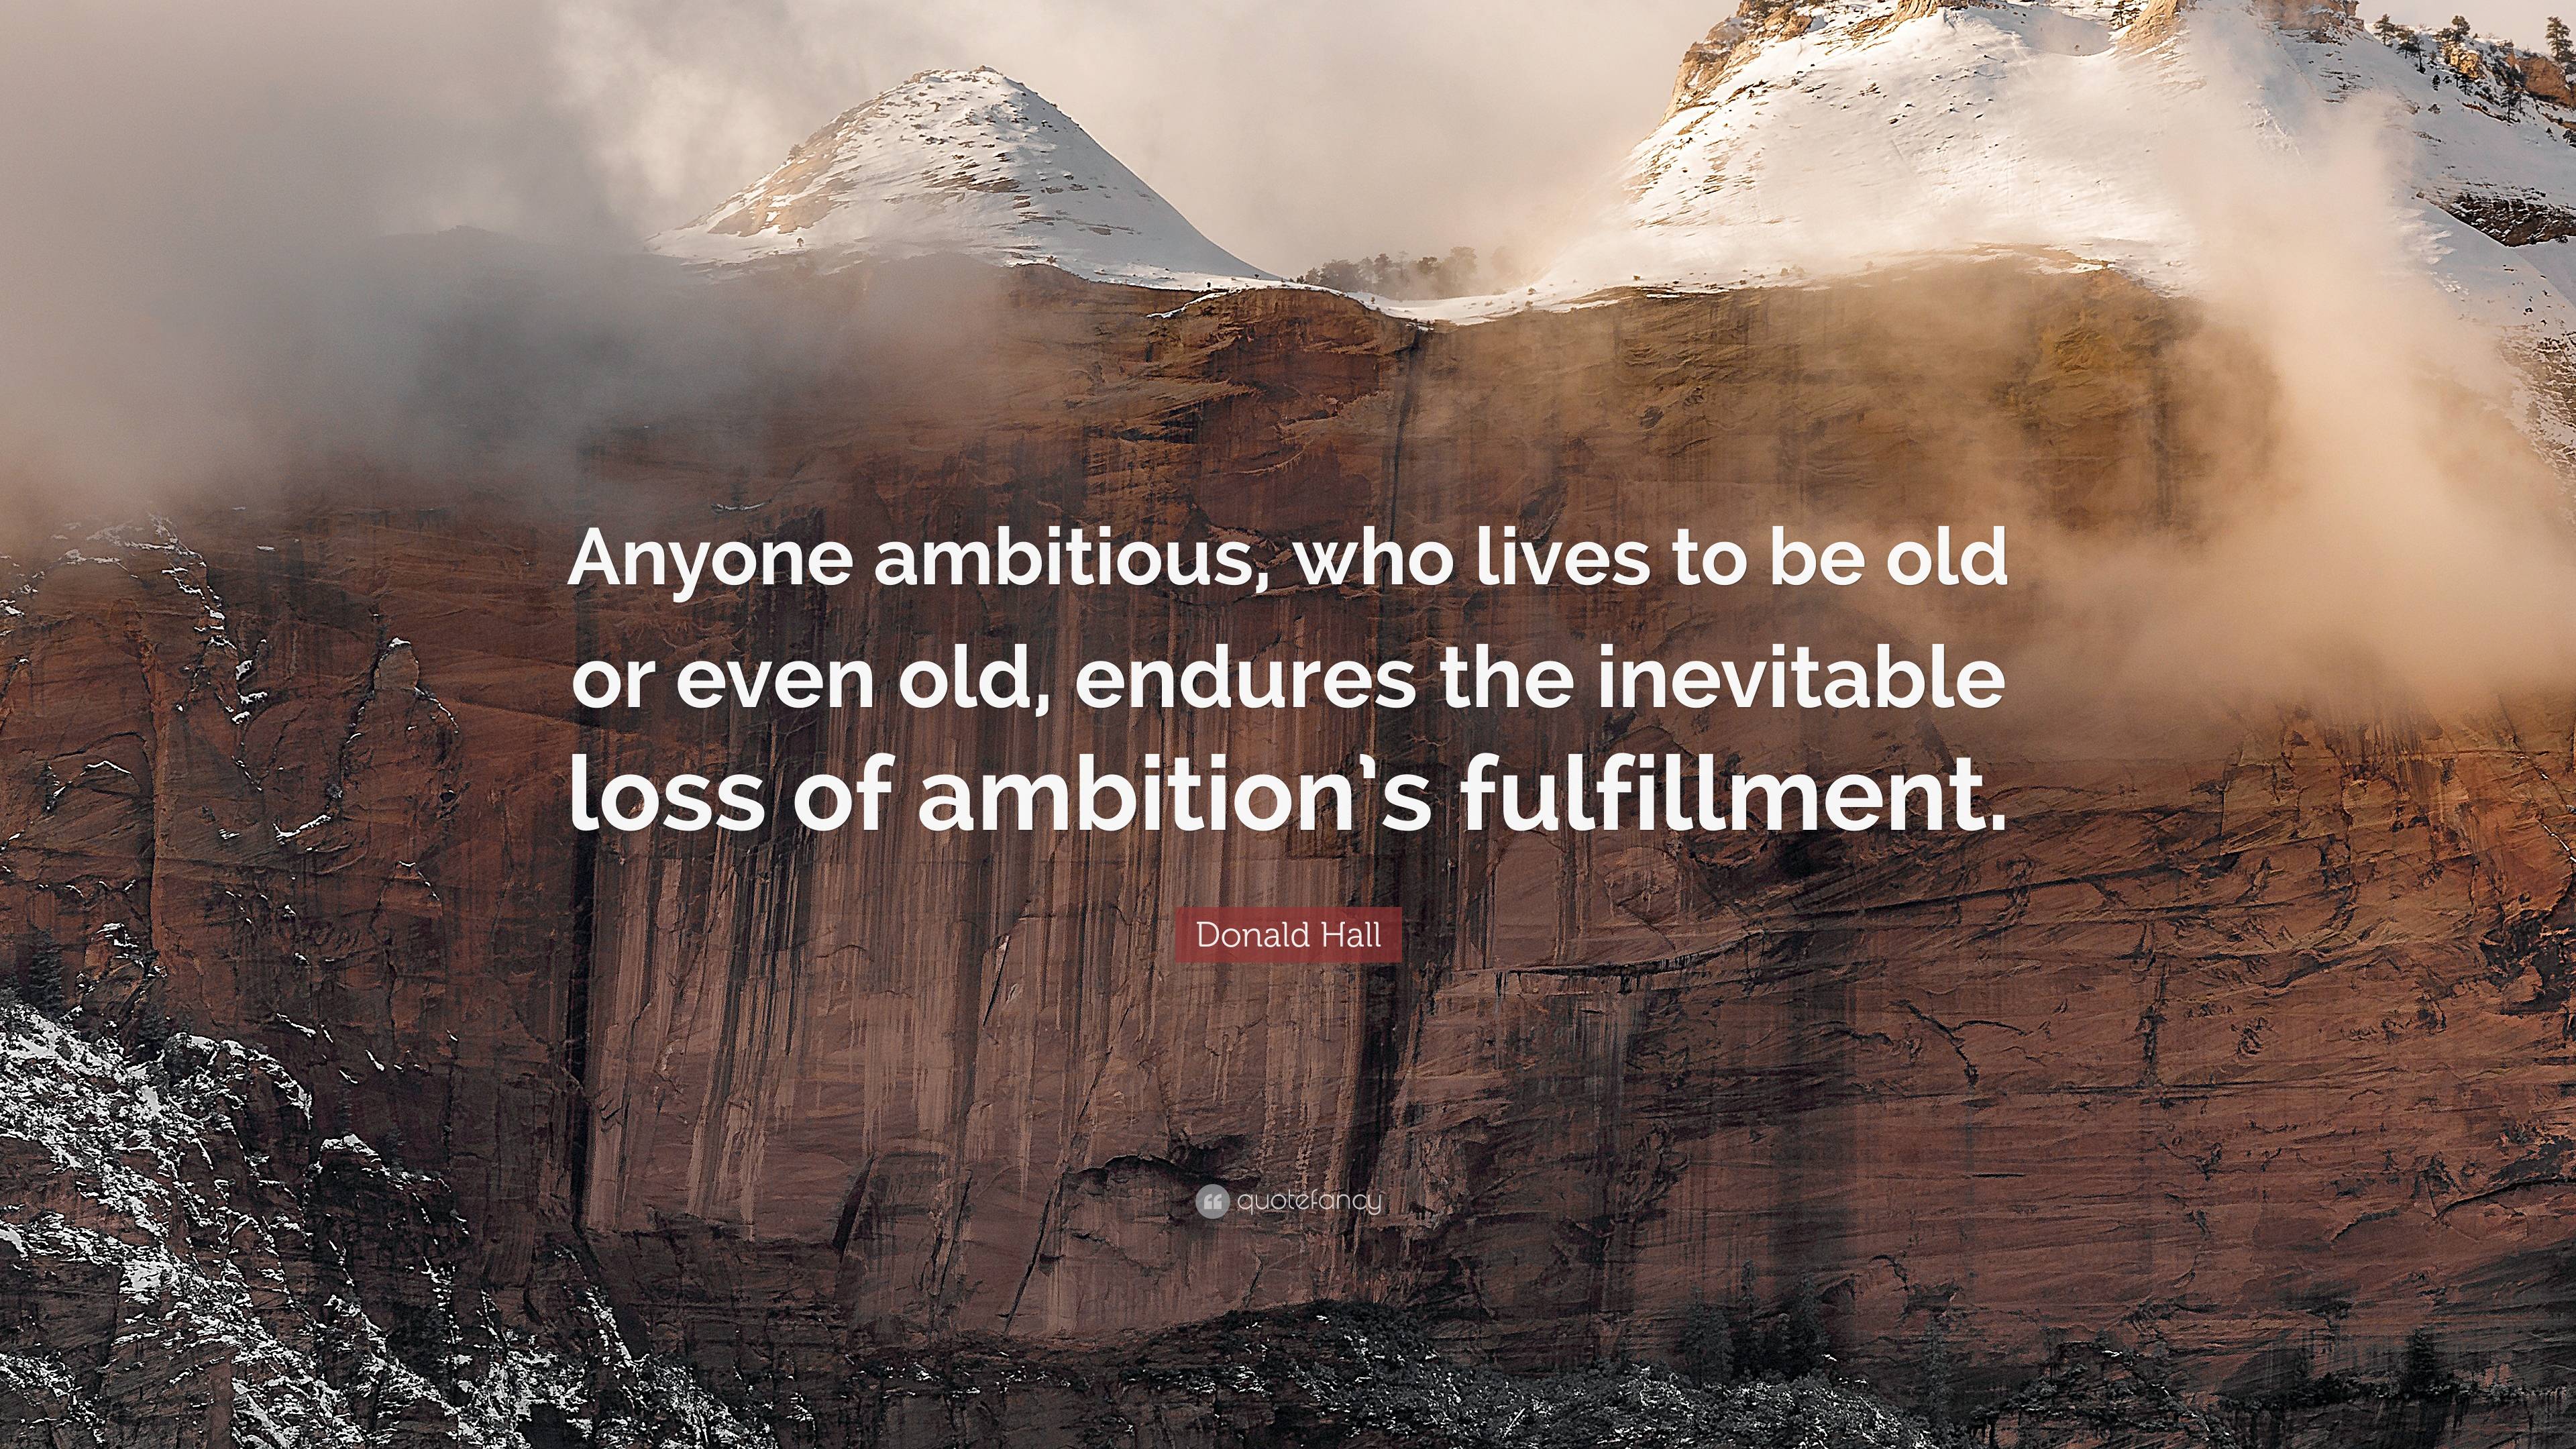 Donald Hall Quote “anyone Ambitious Who Lives To Be Old Or Even Old Endures The Inevitable 